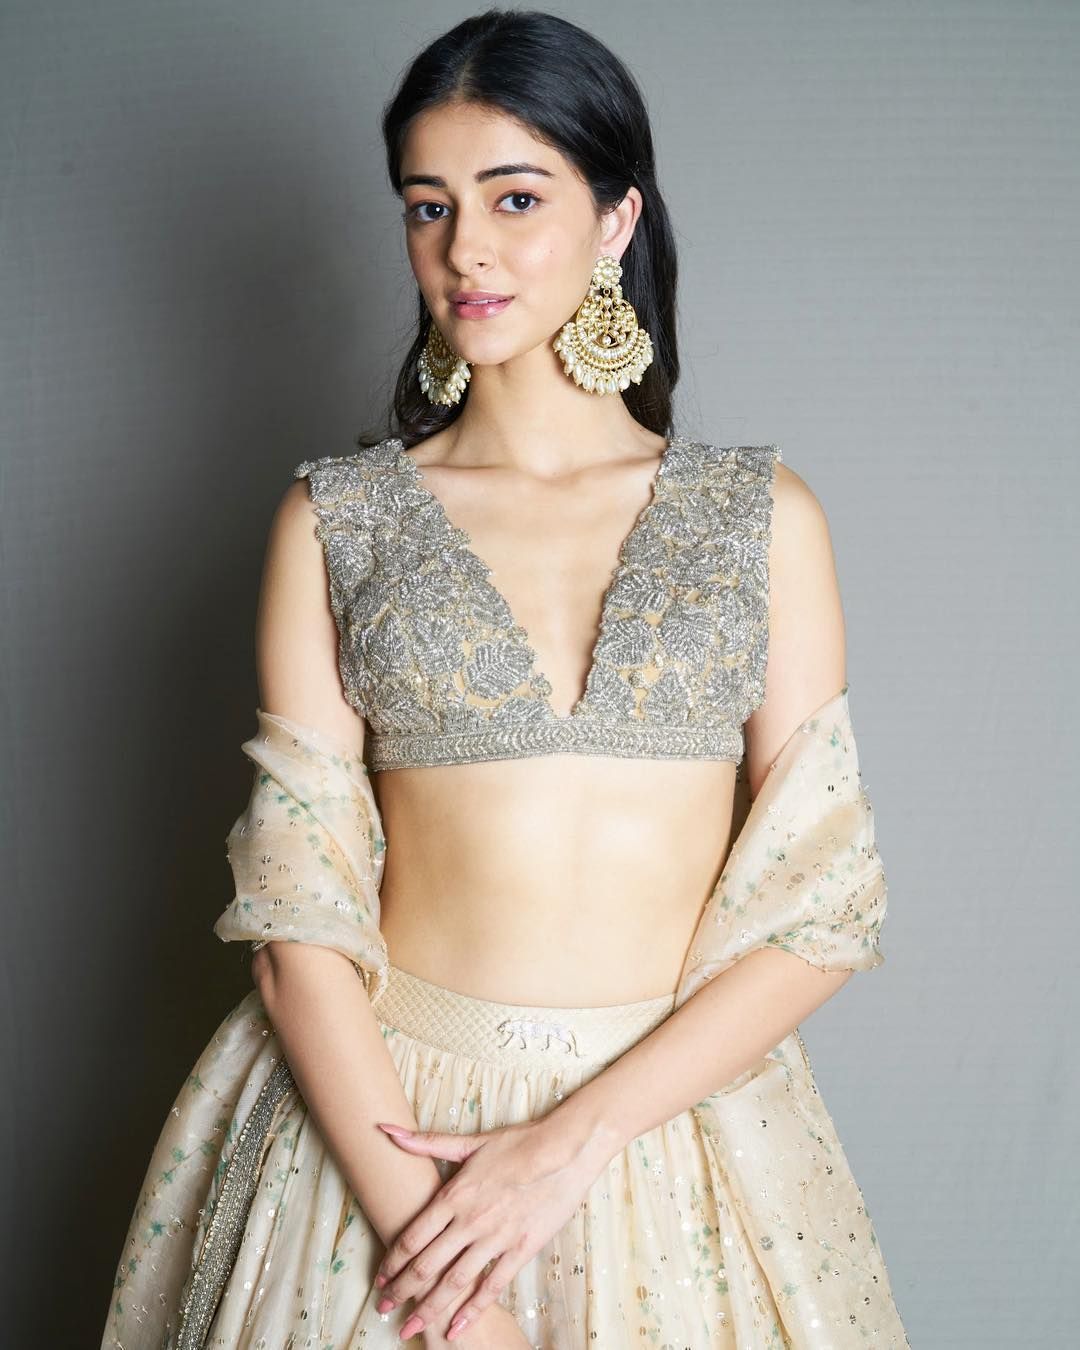 Ananya Panday's Dad Chunky Pandey Clears Off Rumors Regarding Her Fake Admission, Says, "She Kept Quiet For Long"